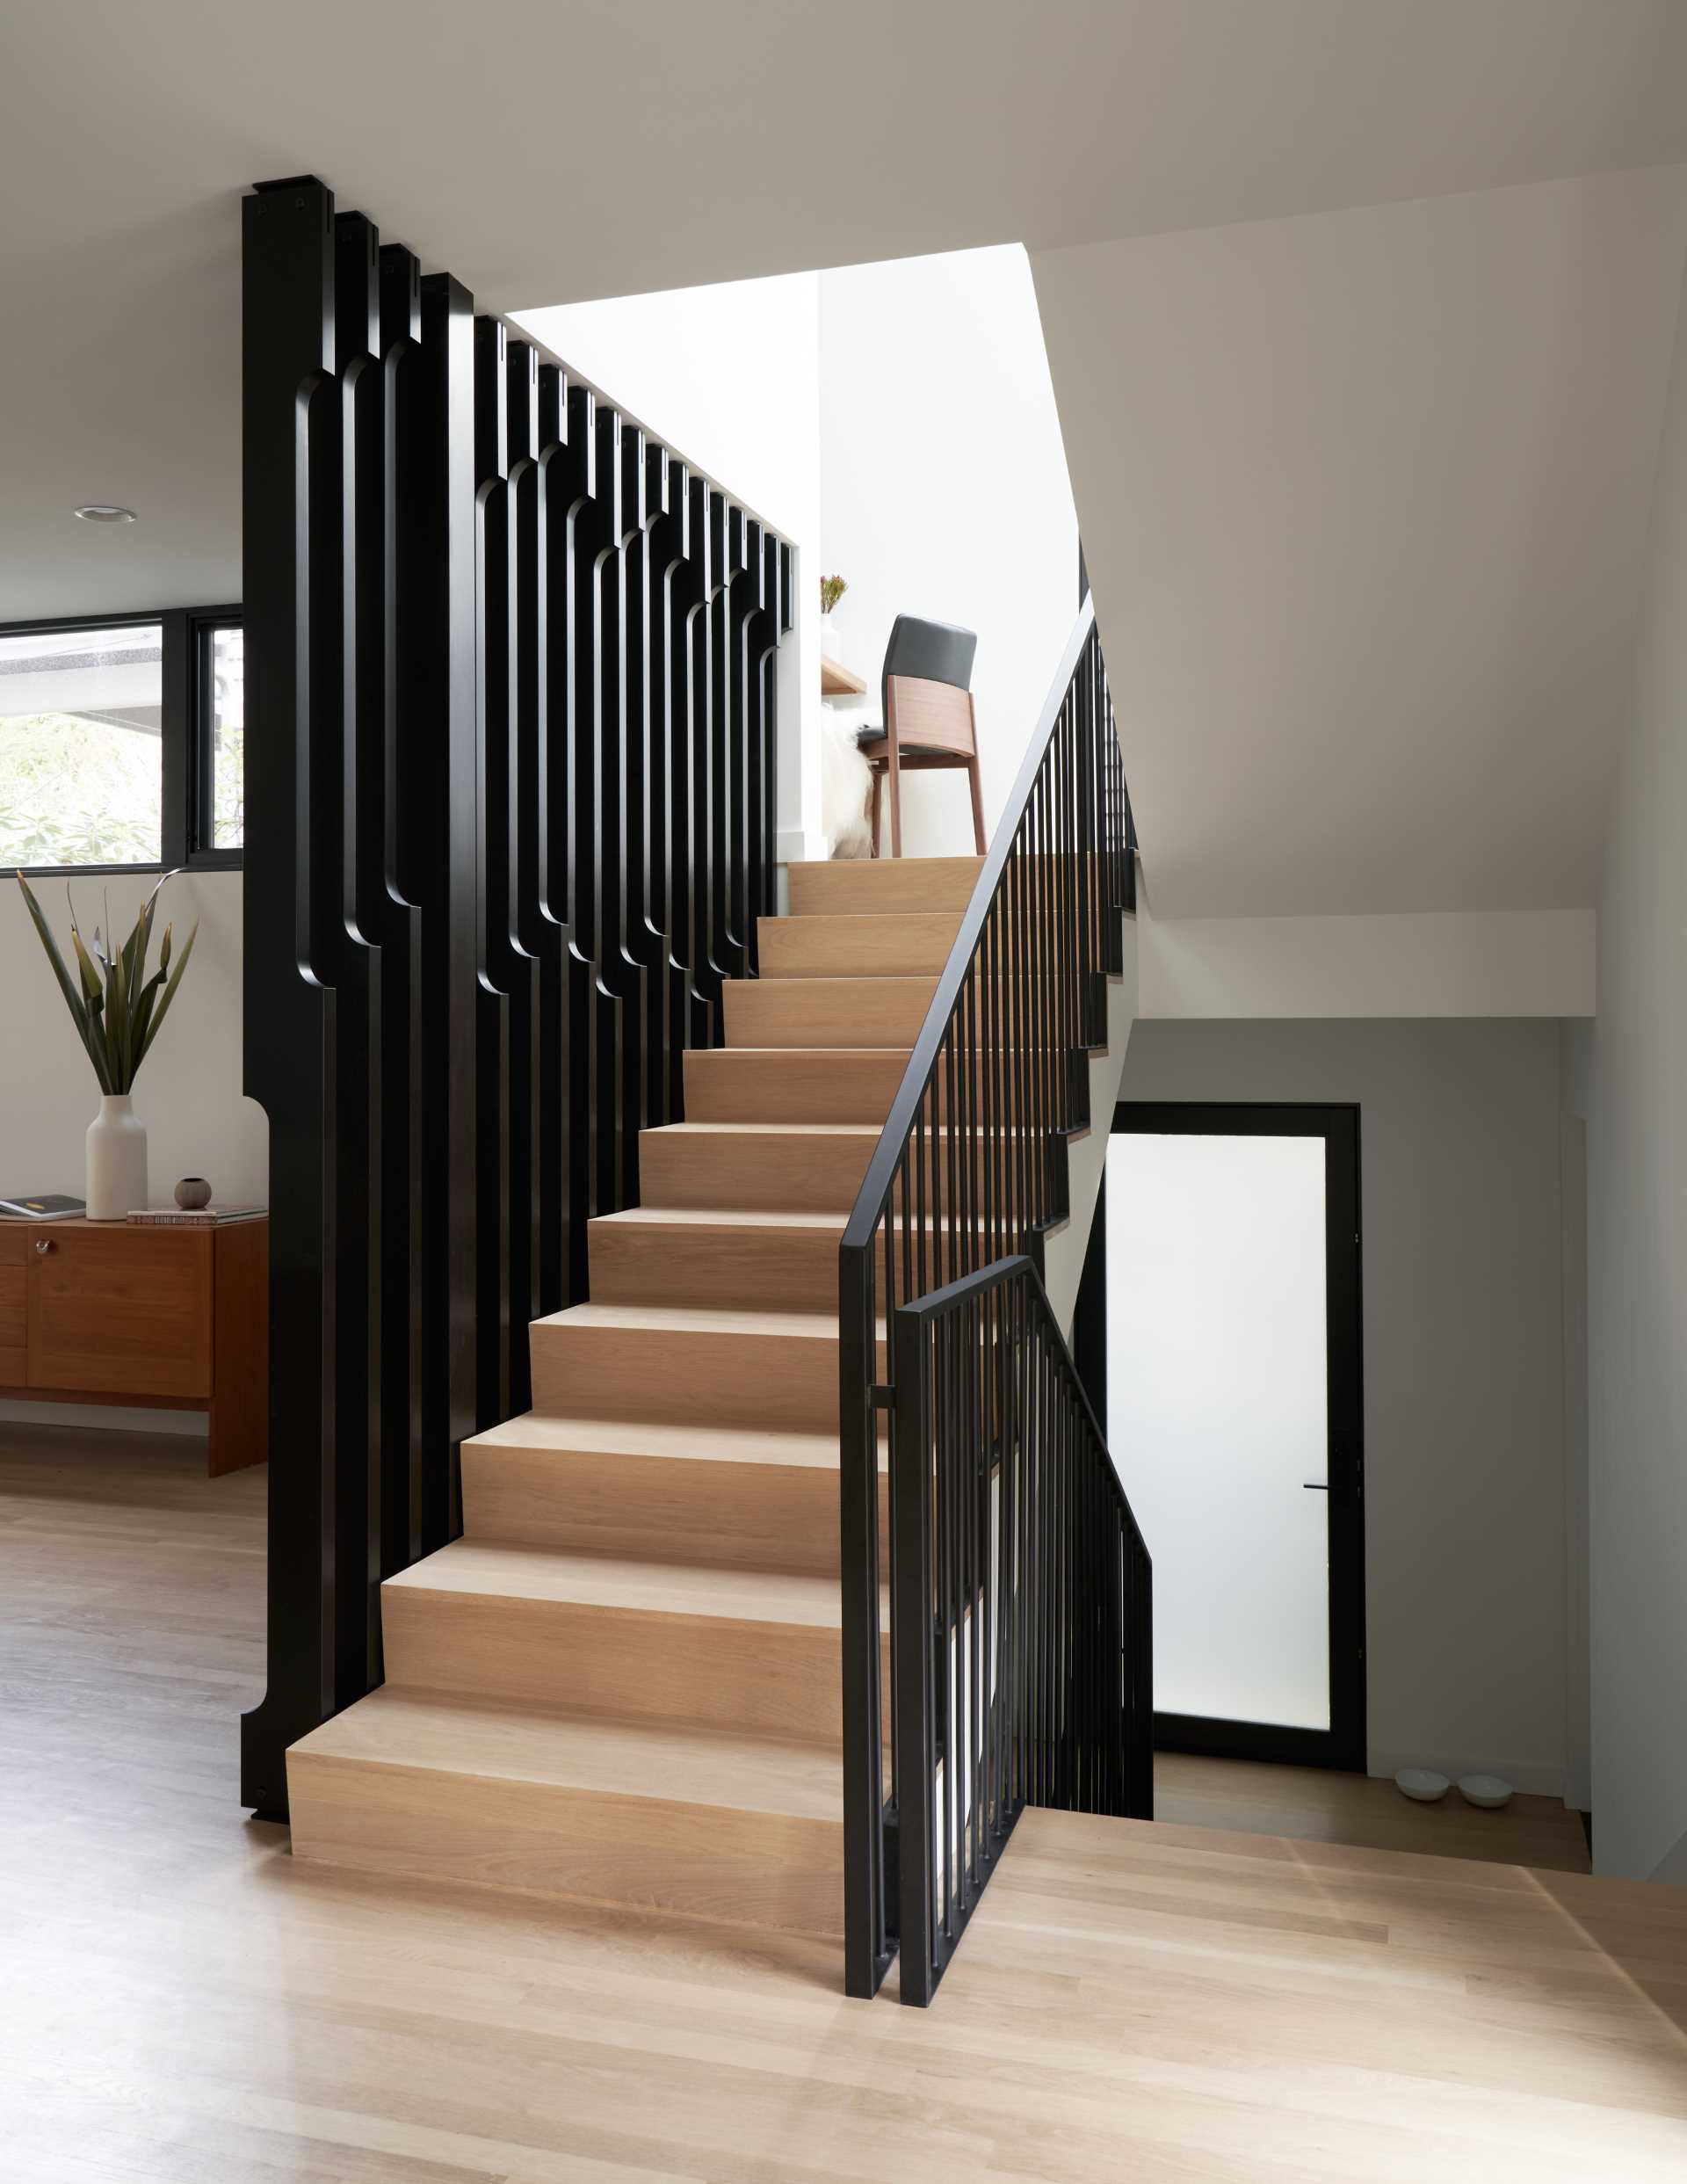 A modern wood and black staircase with a small office nook in the landing.